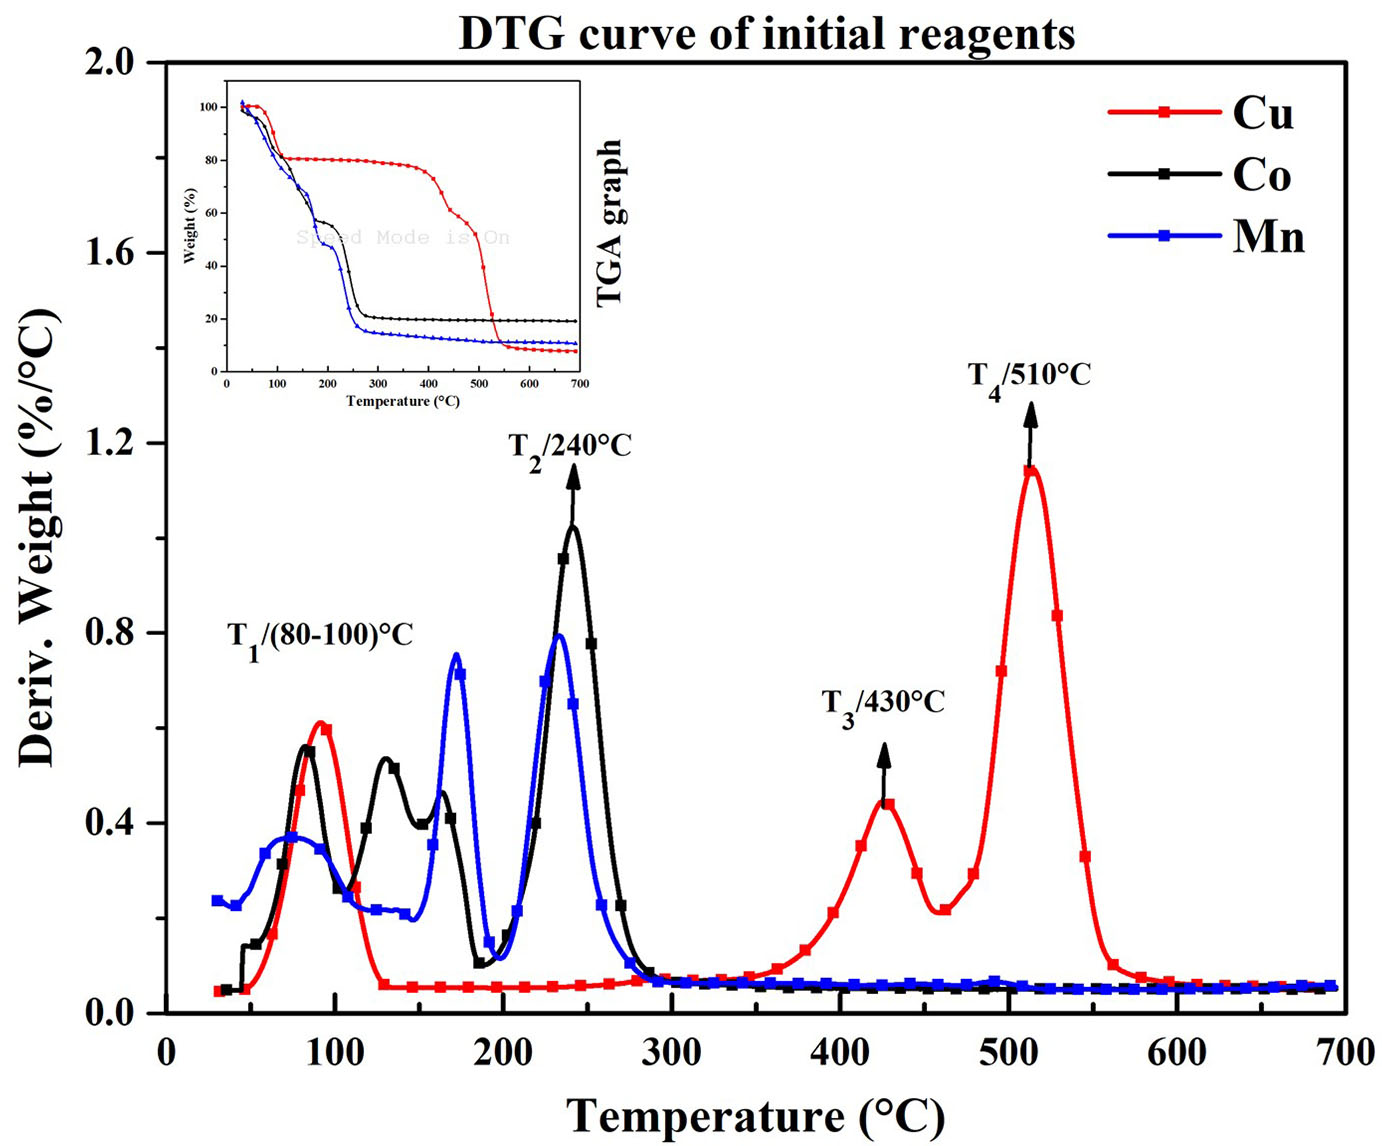 TGA (embedded curve graph) / DTG (continuous line) of initial reagents: Copper chloride, Cobalt nitrate and Manganese nitrate